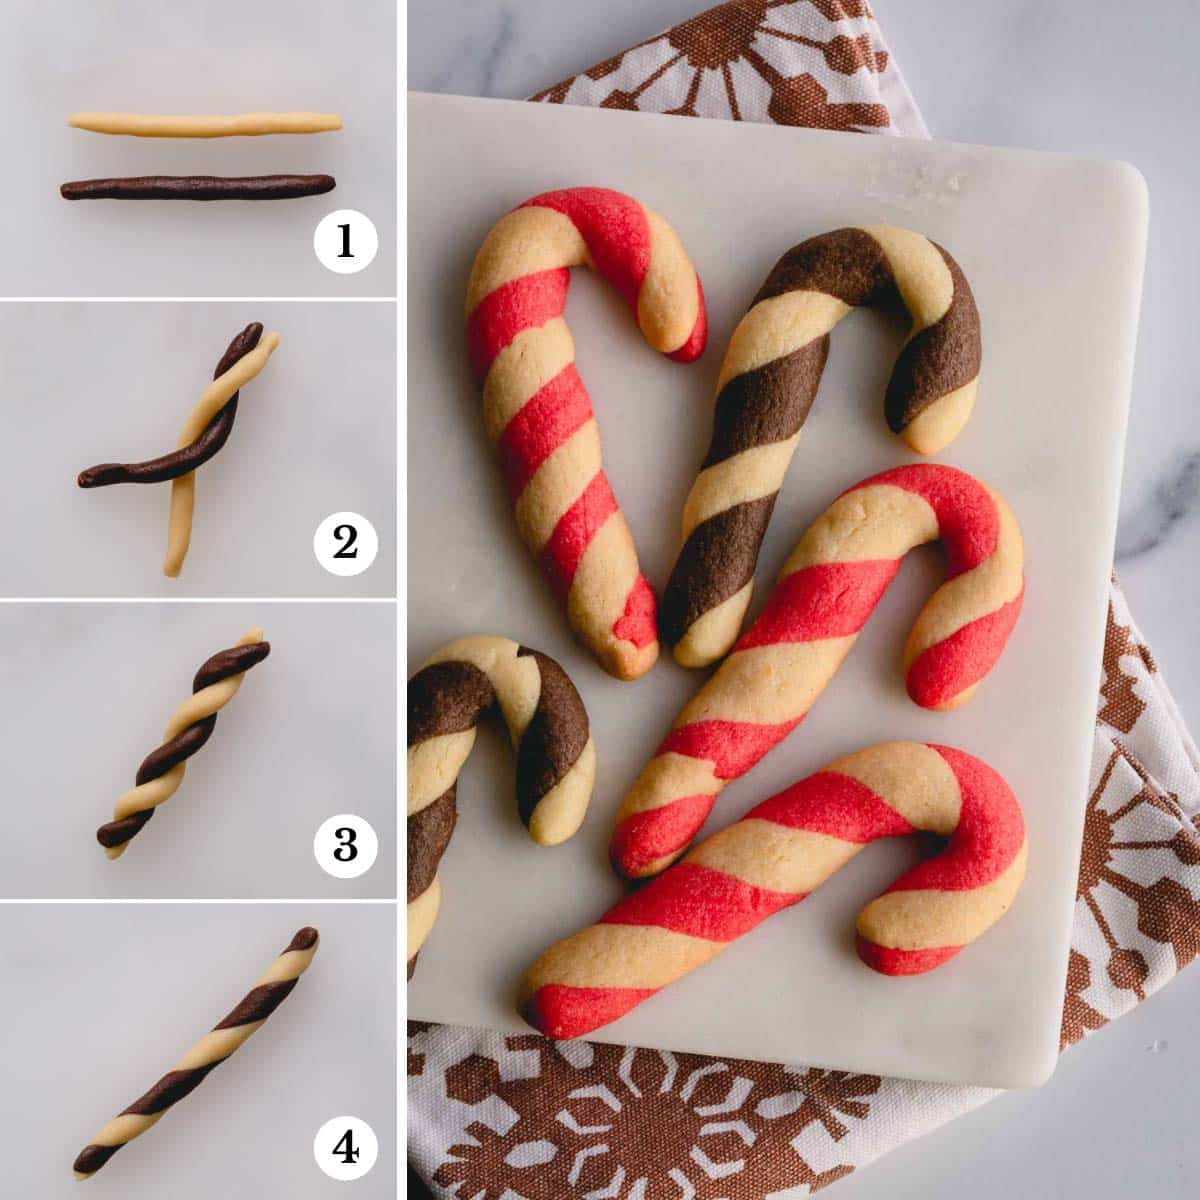 Step by step photos of making candy cane cookies with red and white and white and chocolate cookies.